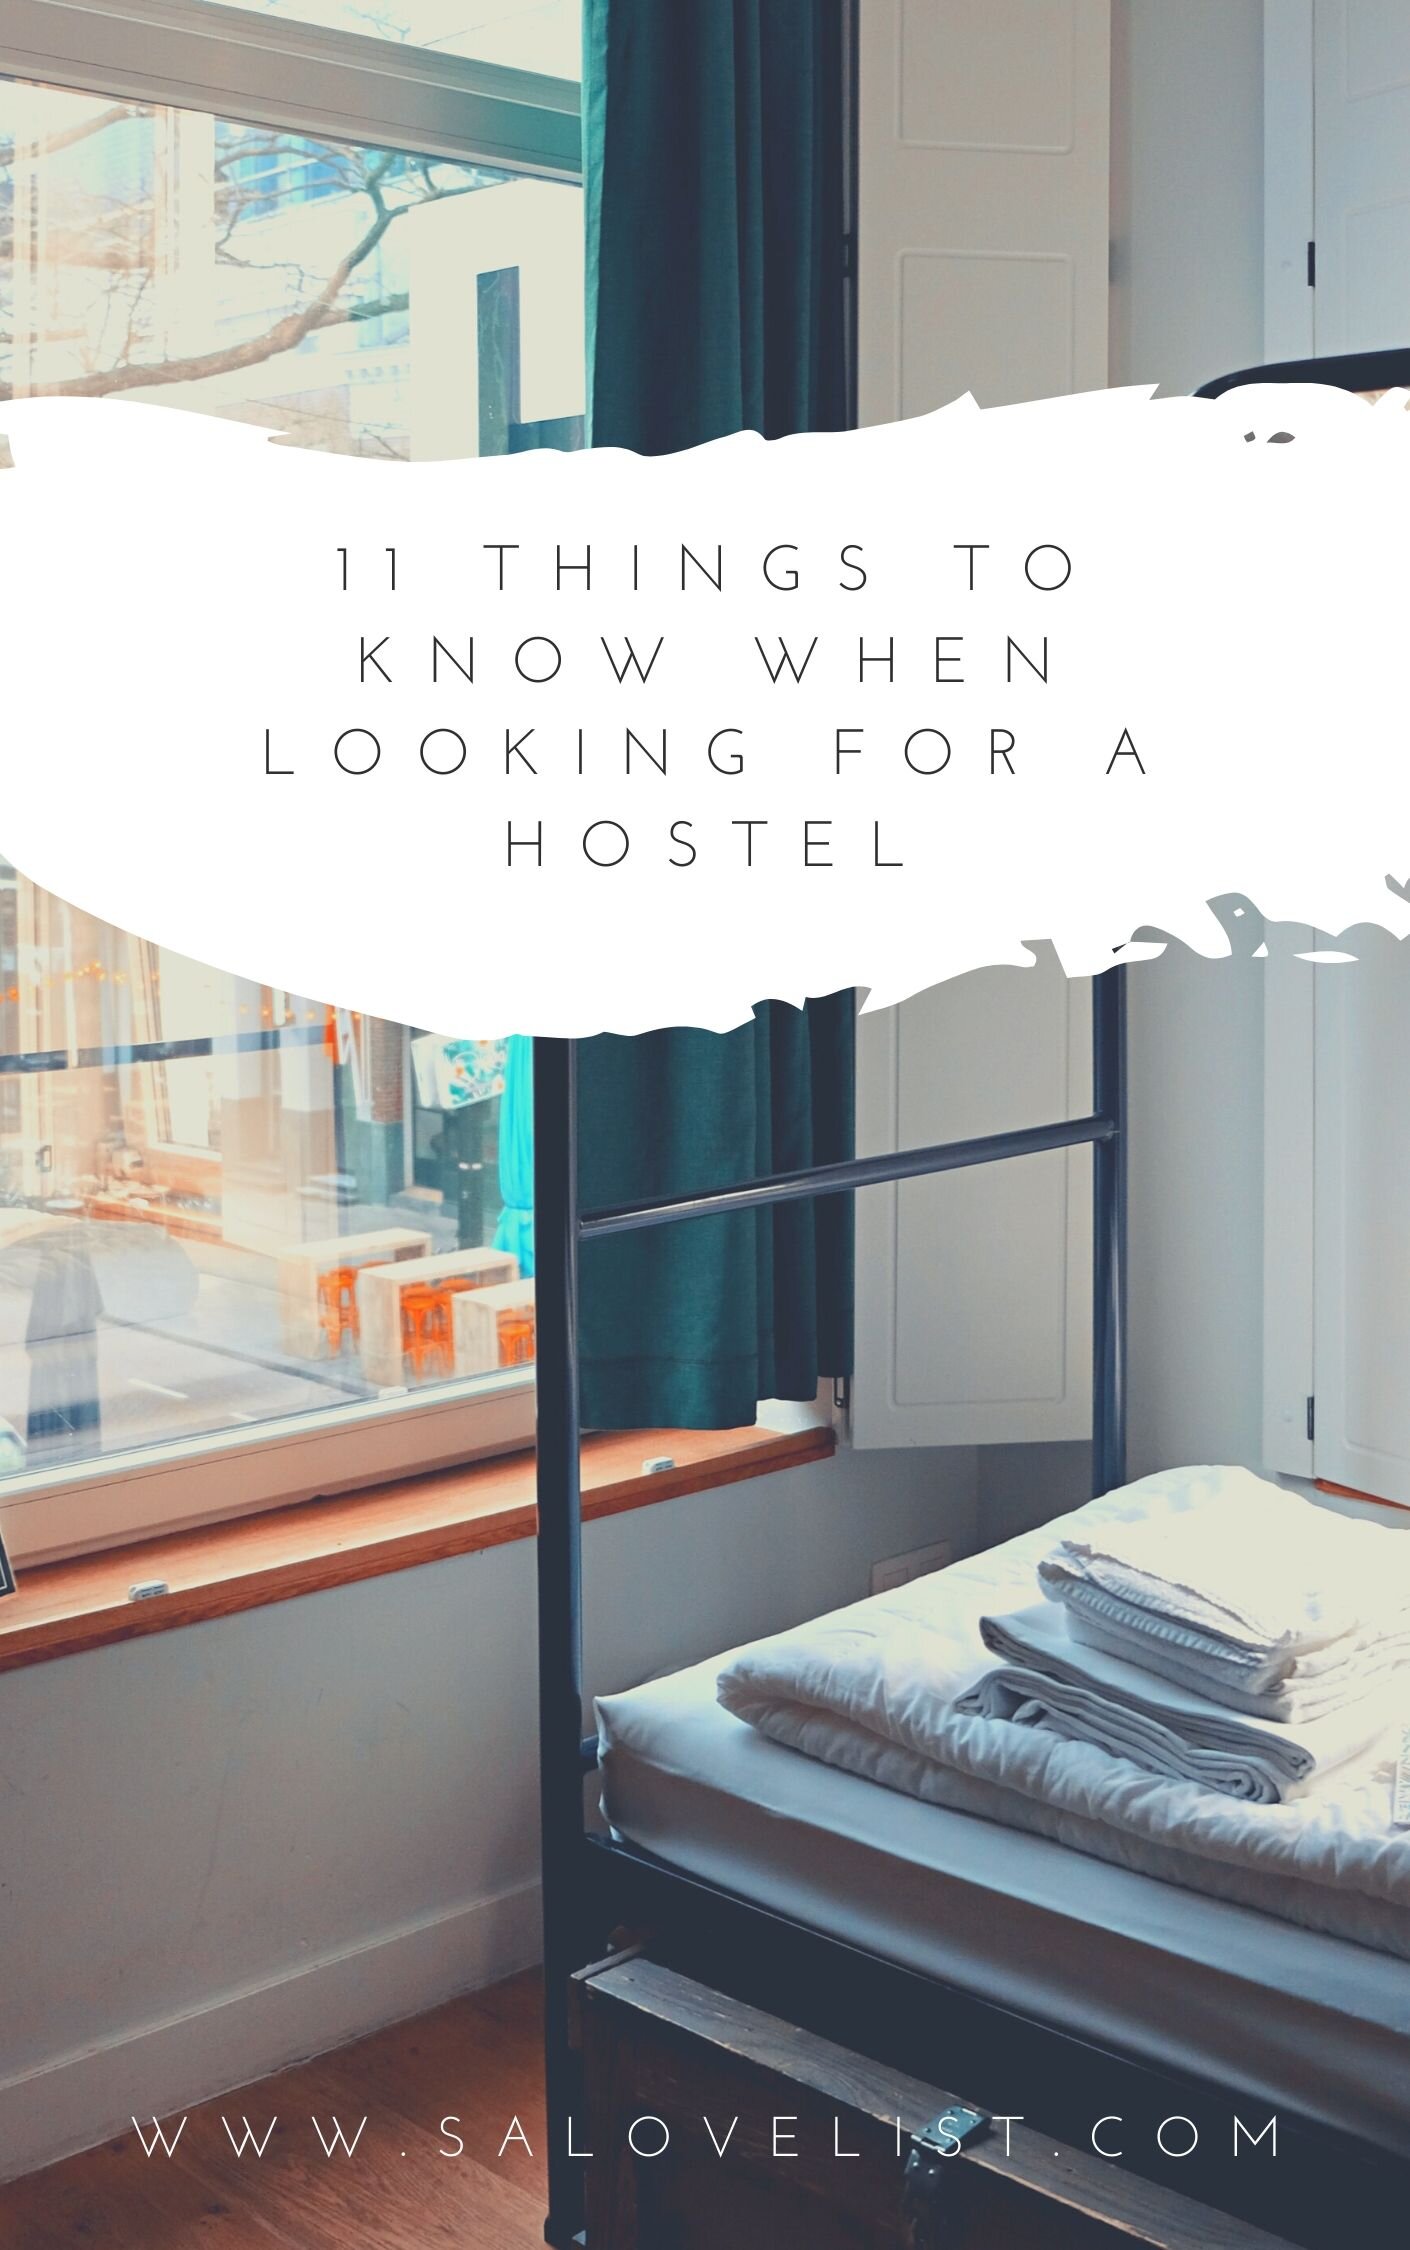 11 Things to know when looking for a hostel.jpg